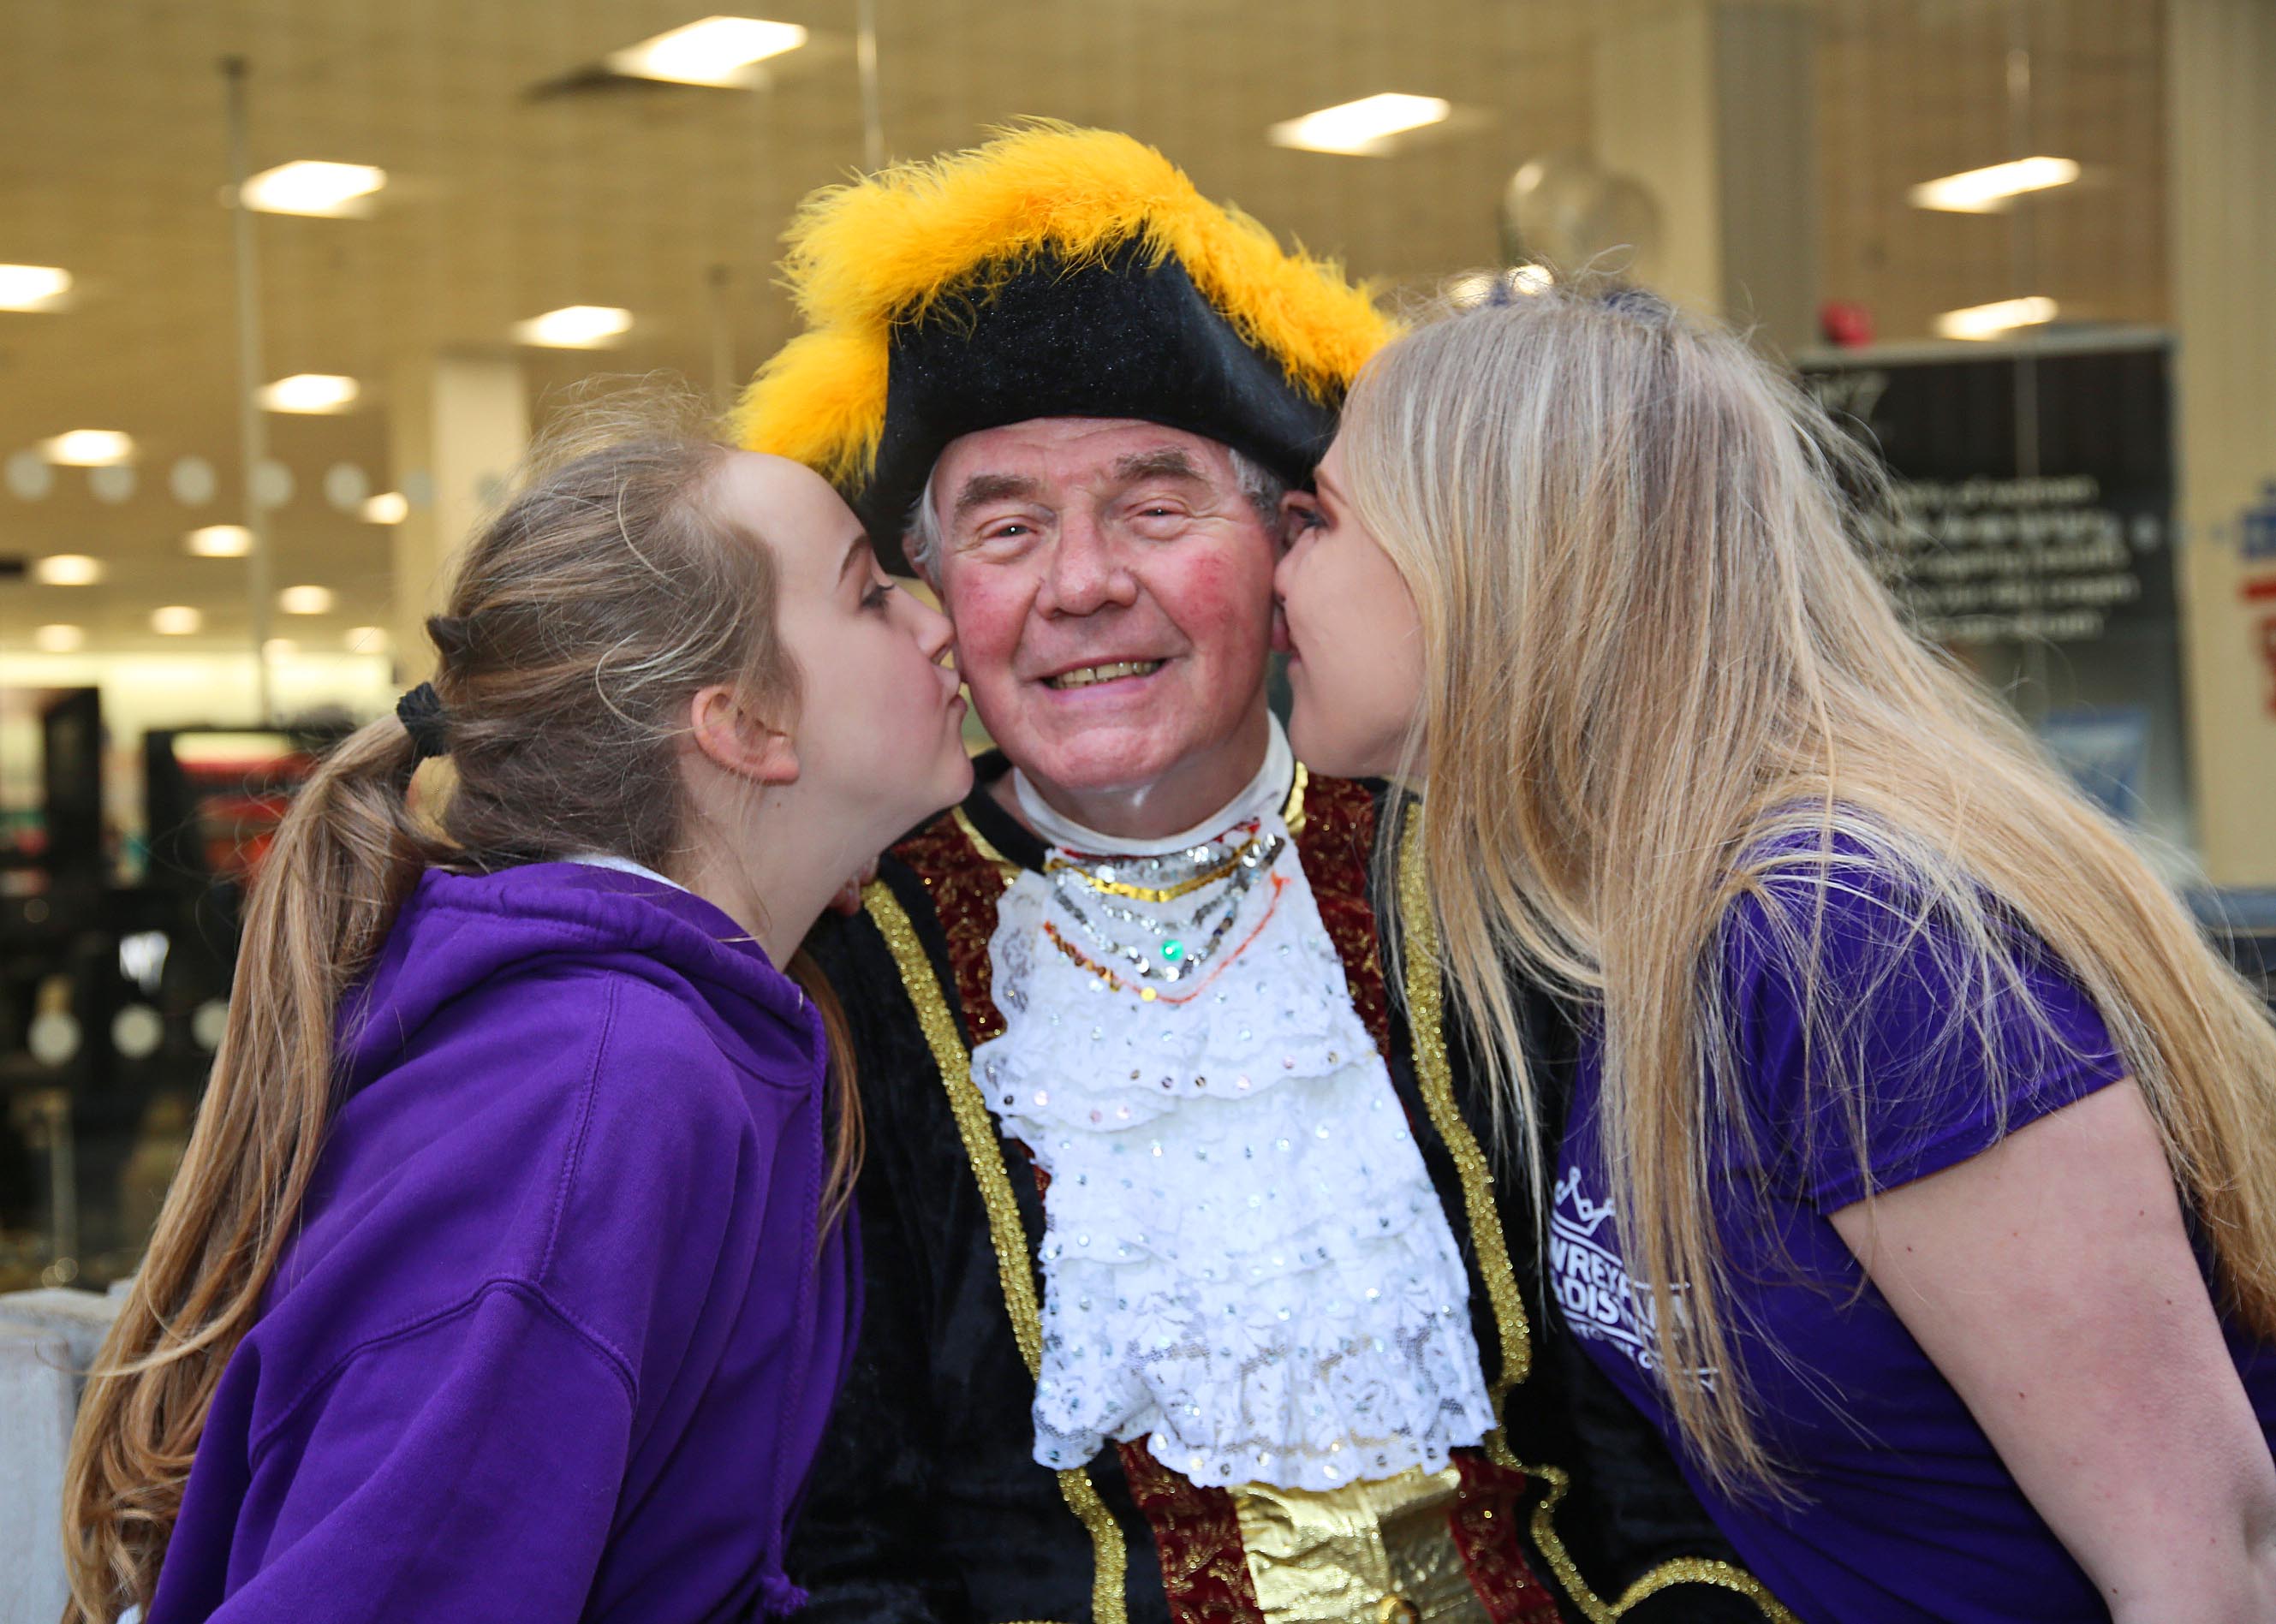 45 not out for panto king Frank – oh yes it is!